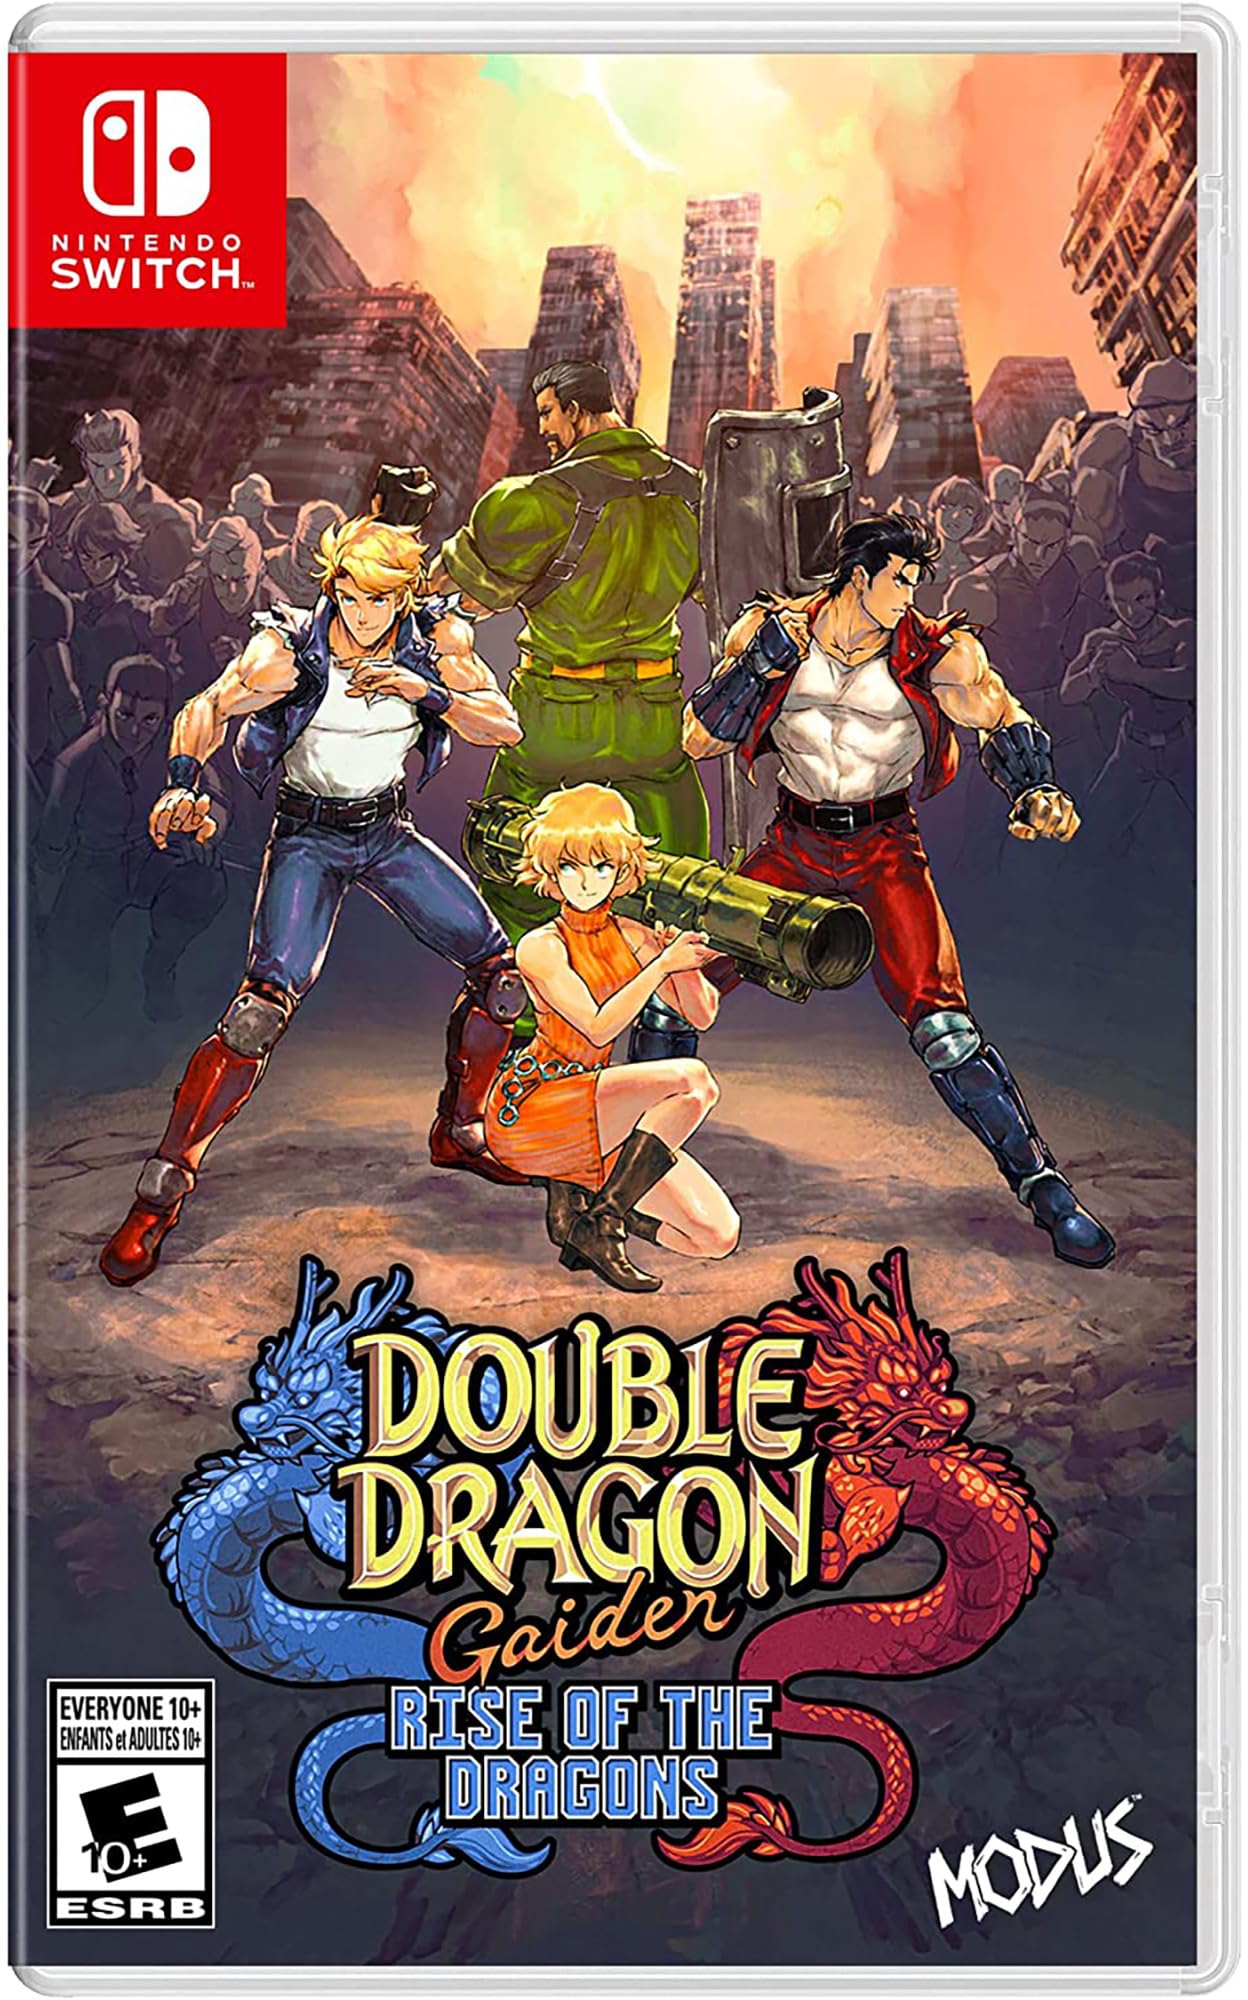 Double Dragon Gaiden Rise of the Dragons Icon HD by sirleviatan on